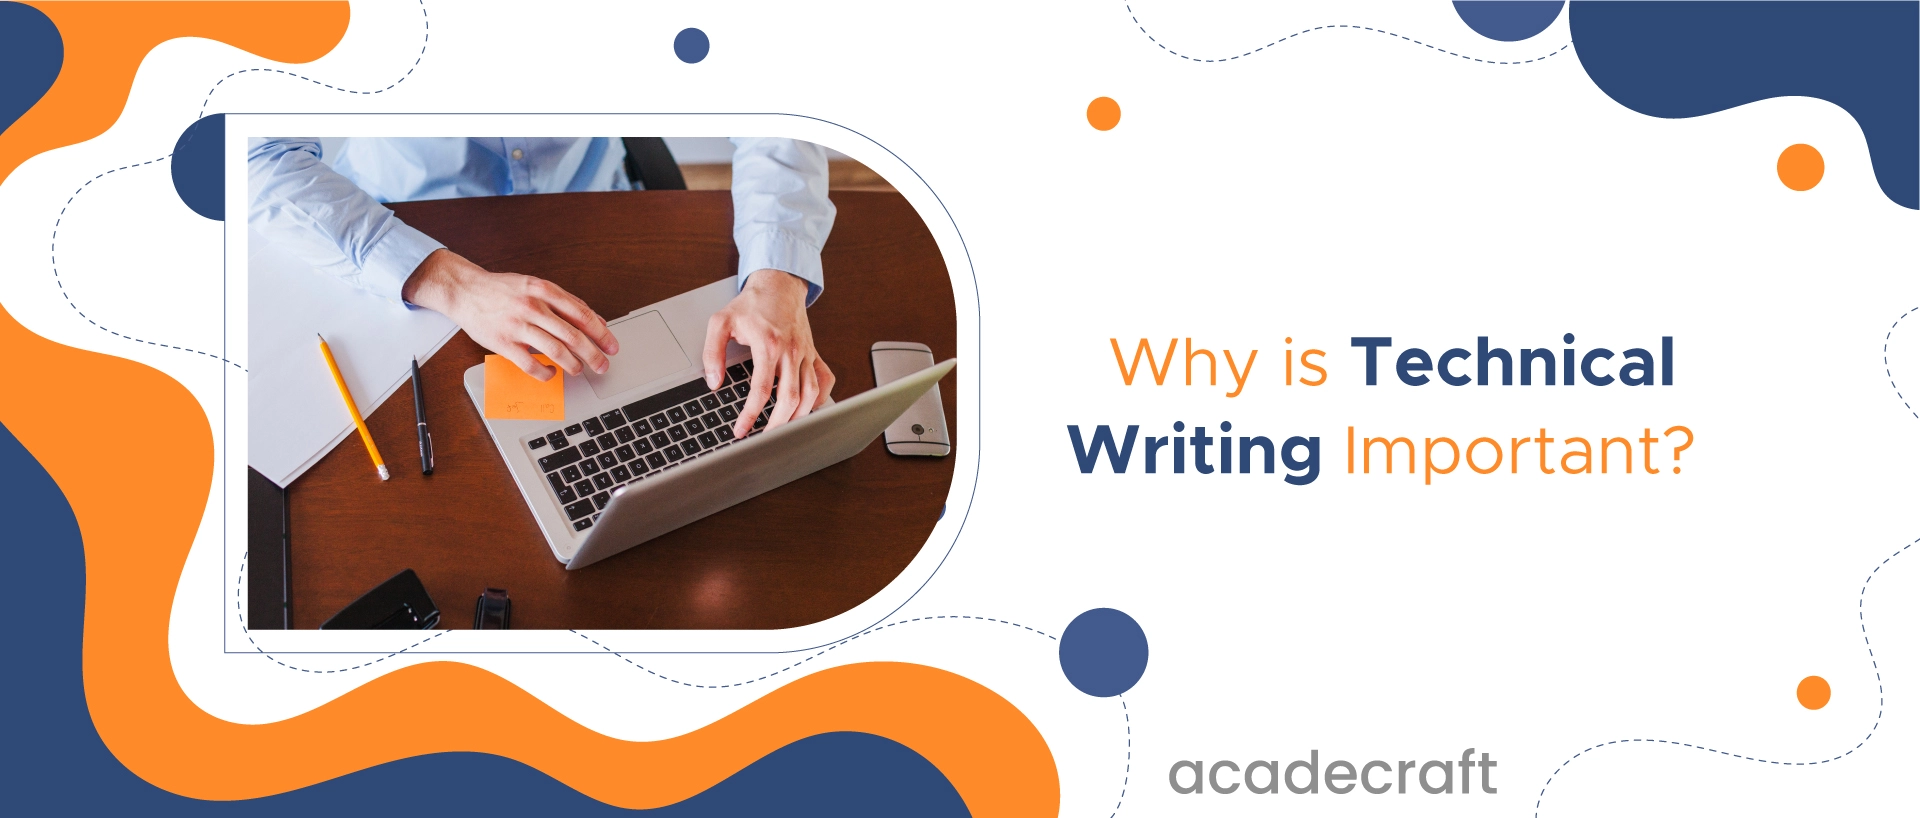 5 Reasons Why is Technical Writing Important